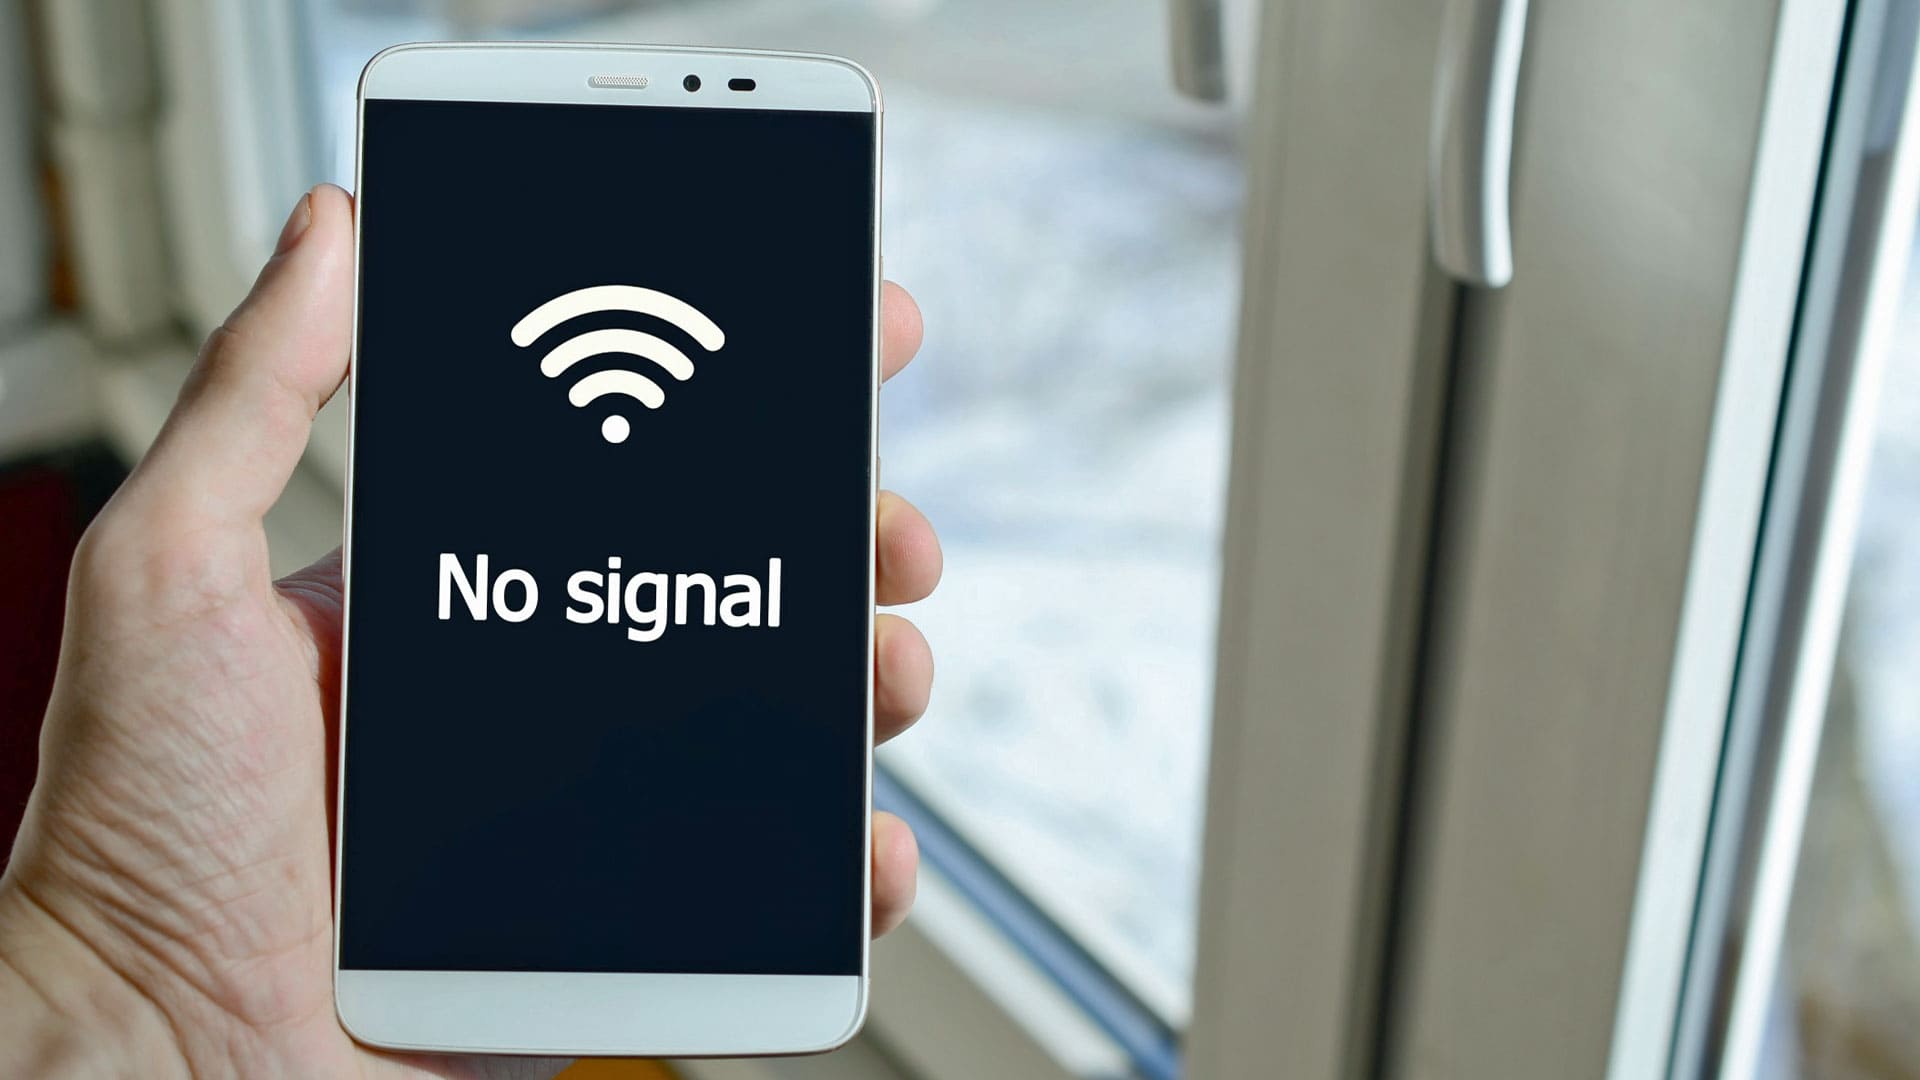 Photo of a smartphone displaying a no signal message